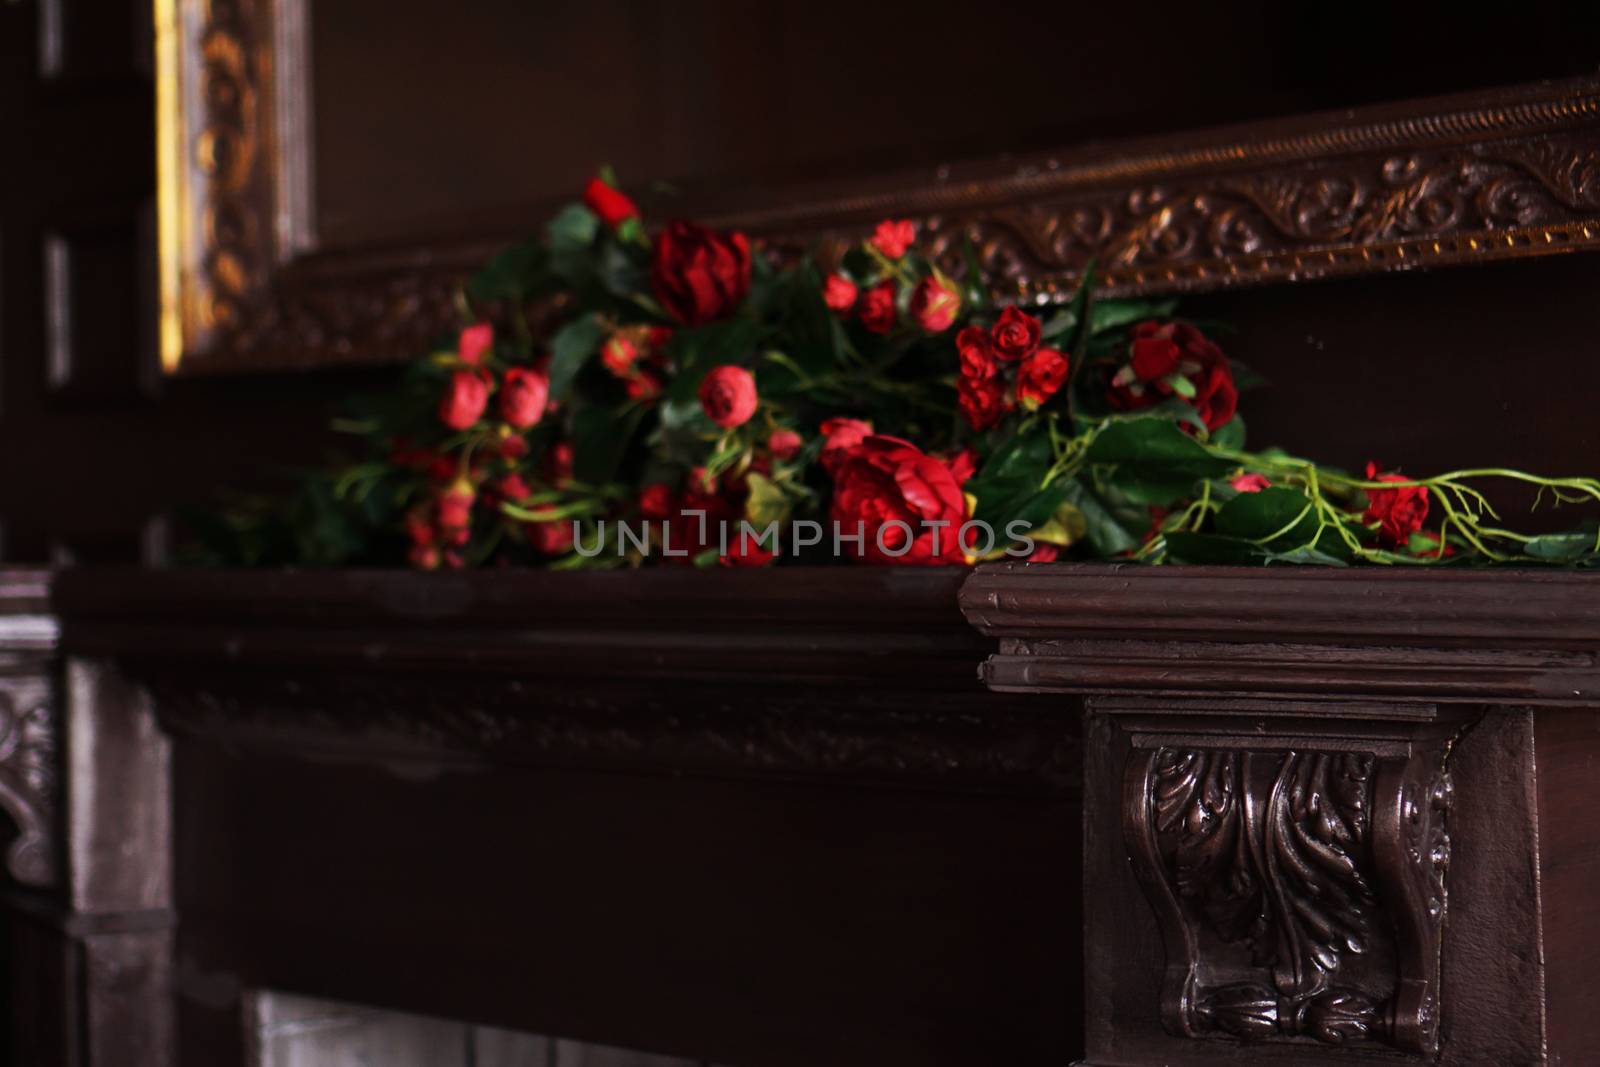 A fake flowers arrangement on a fireplace mantel by natali_brill